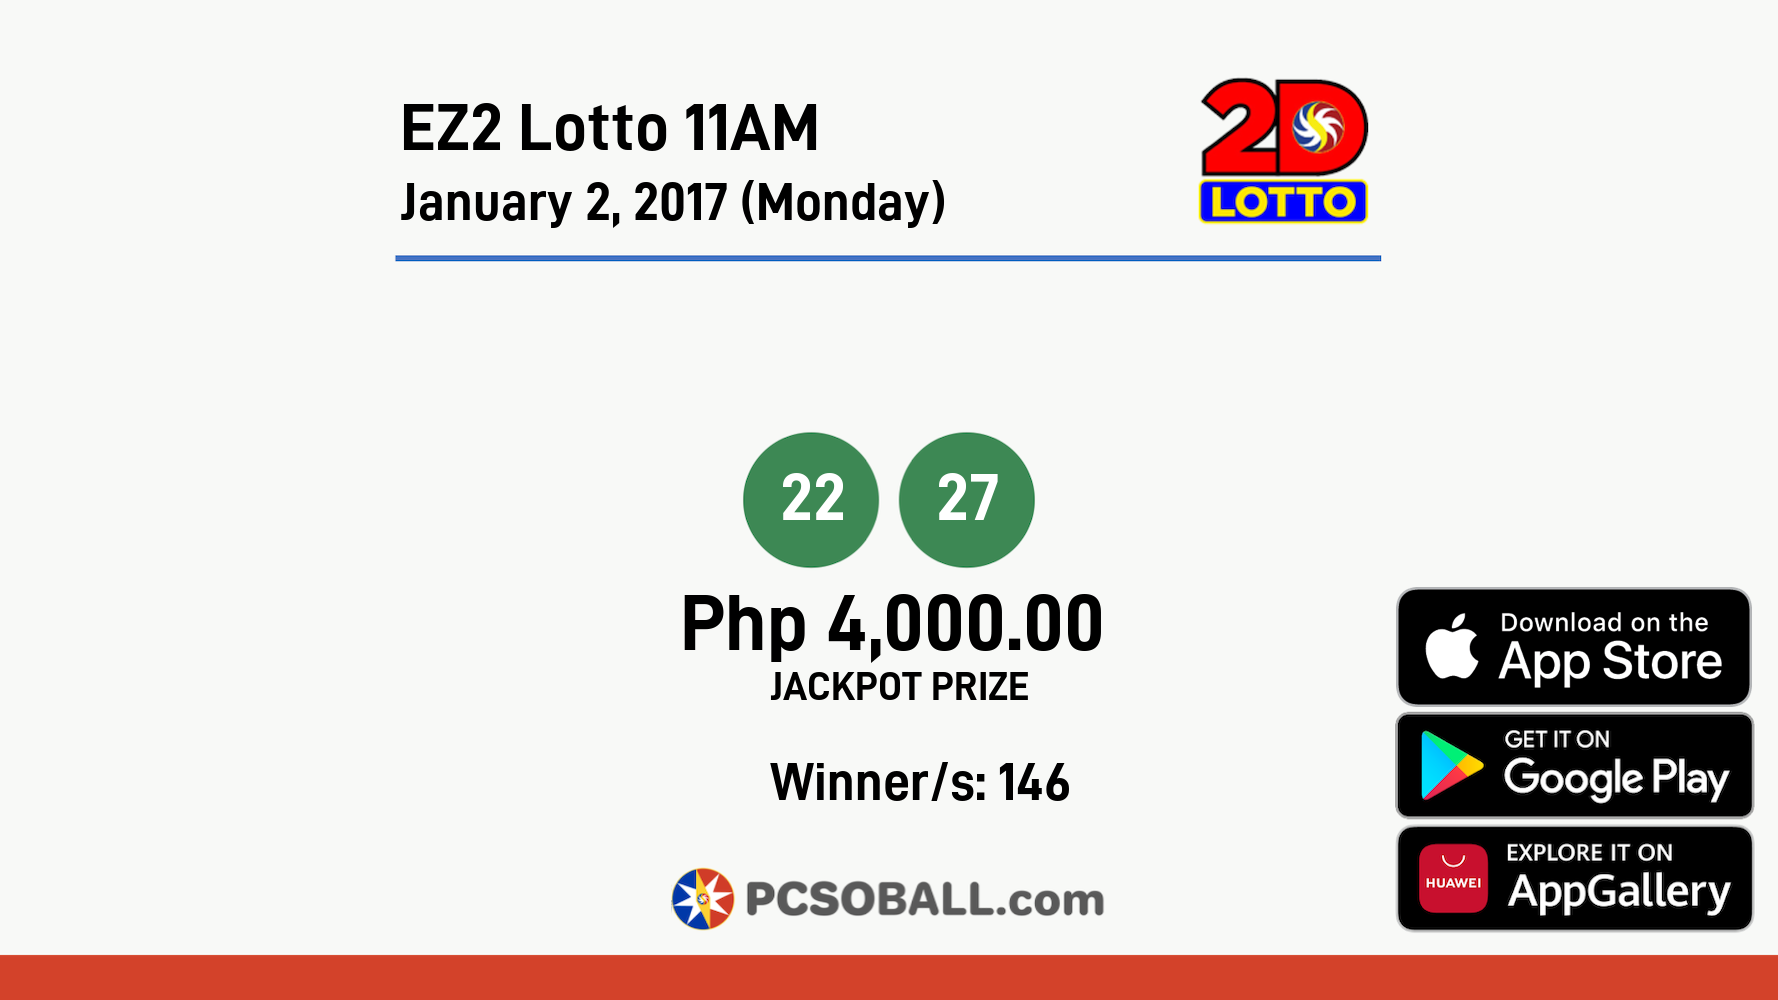 EZ2 Lotto 11AM January 2, 2017 (Monday) Result